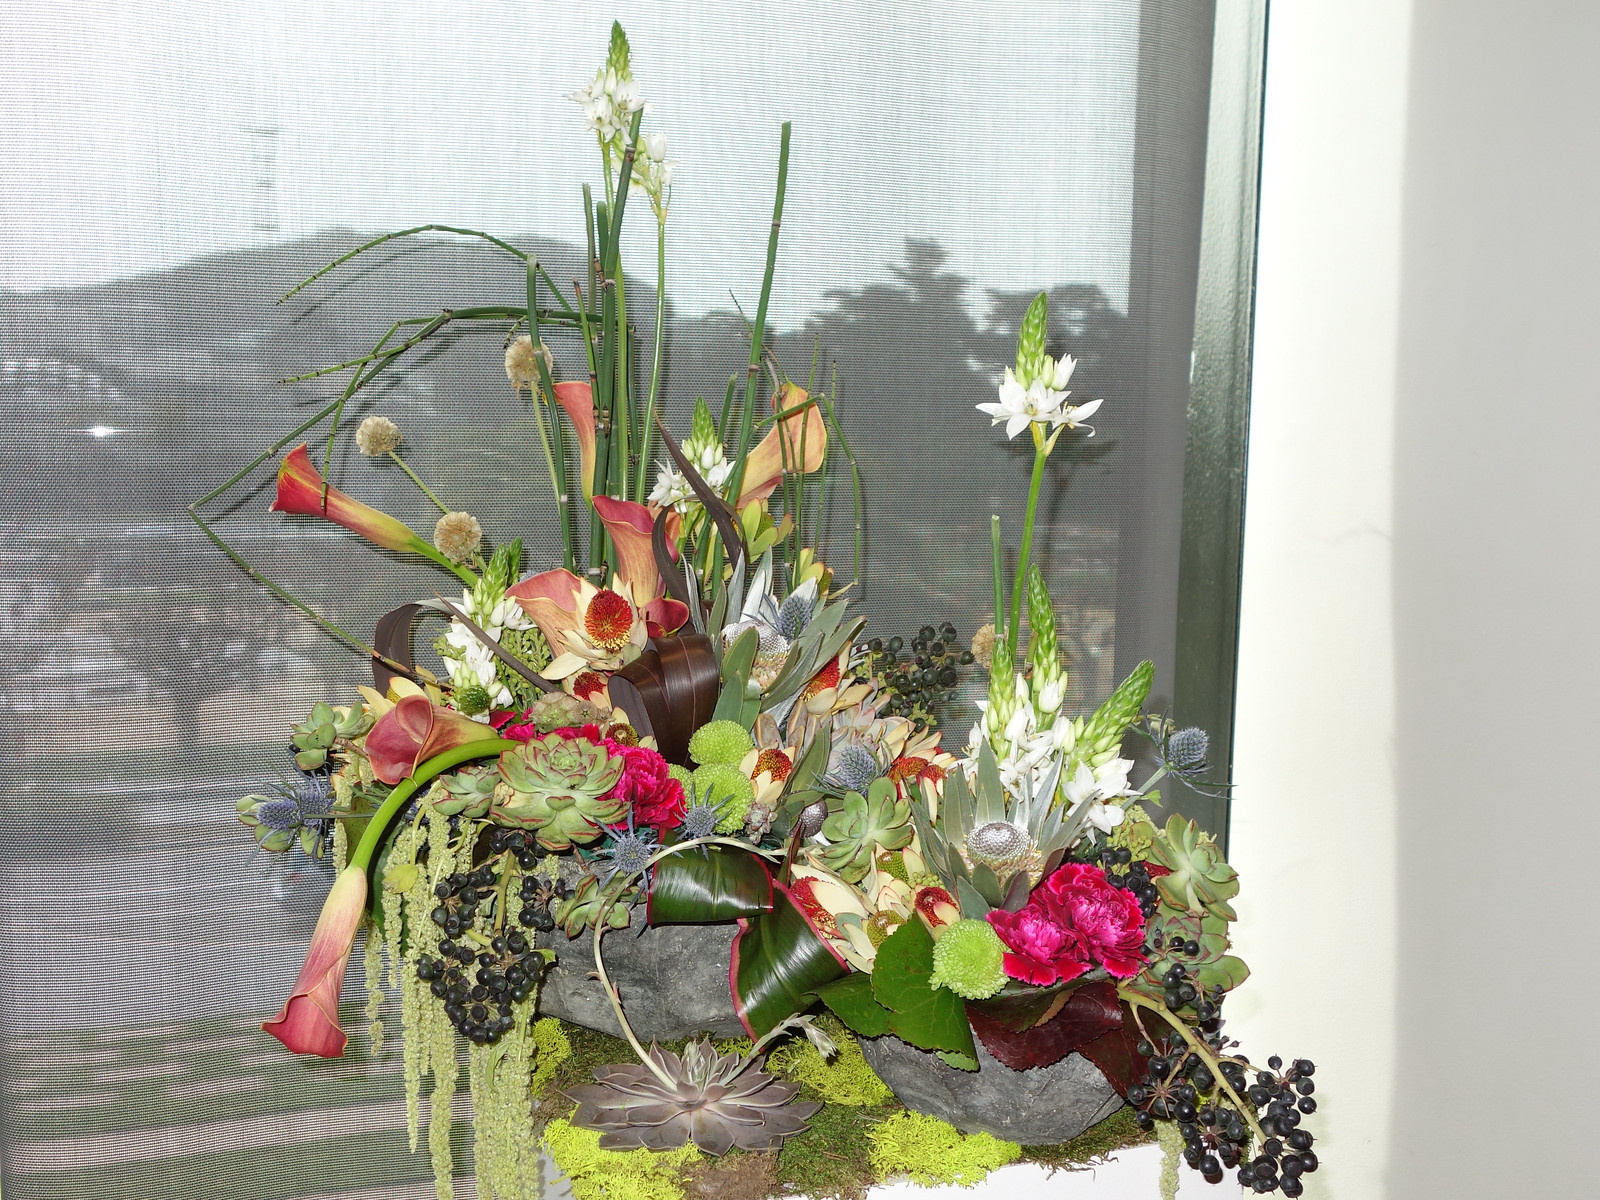 10%20Bouquets%20to%20Art%202013-X3